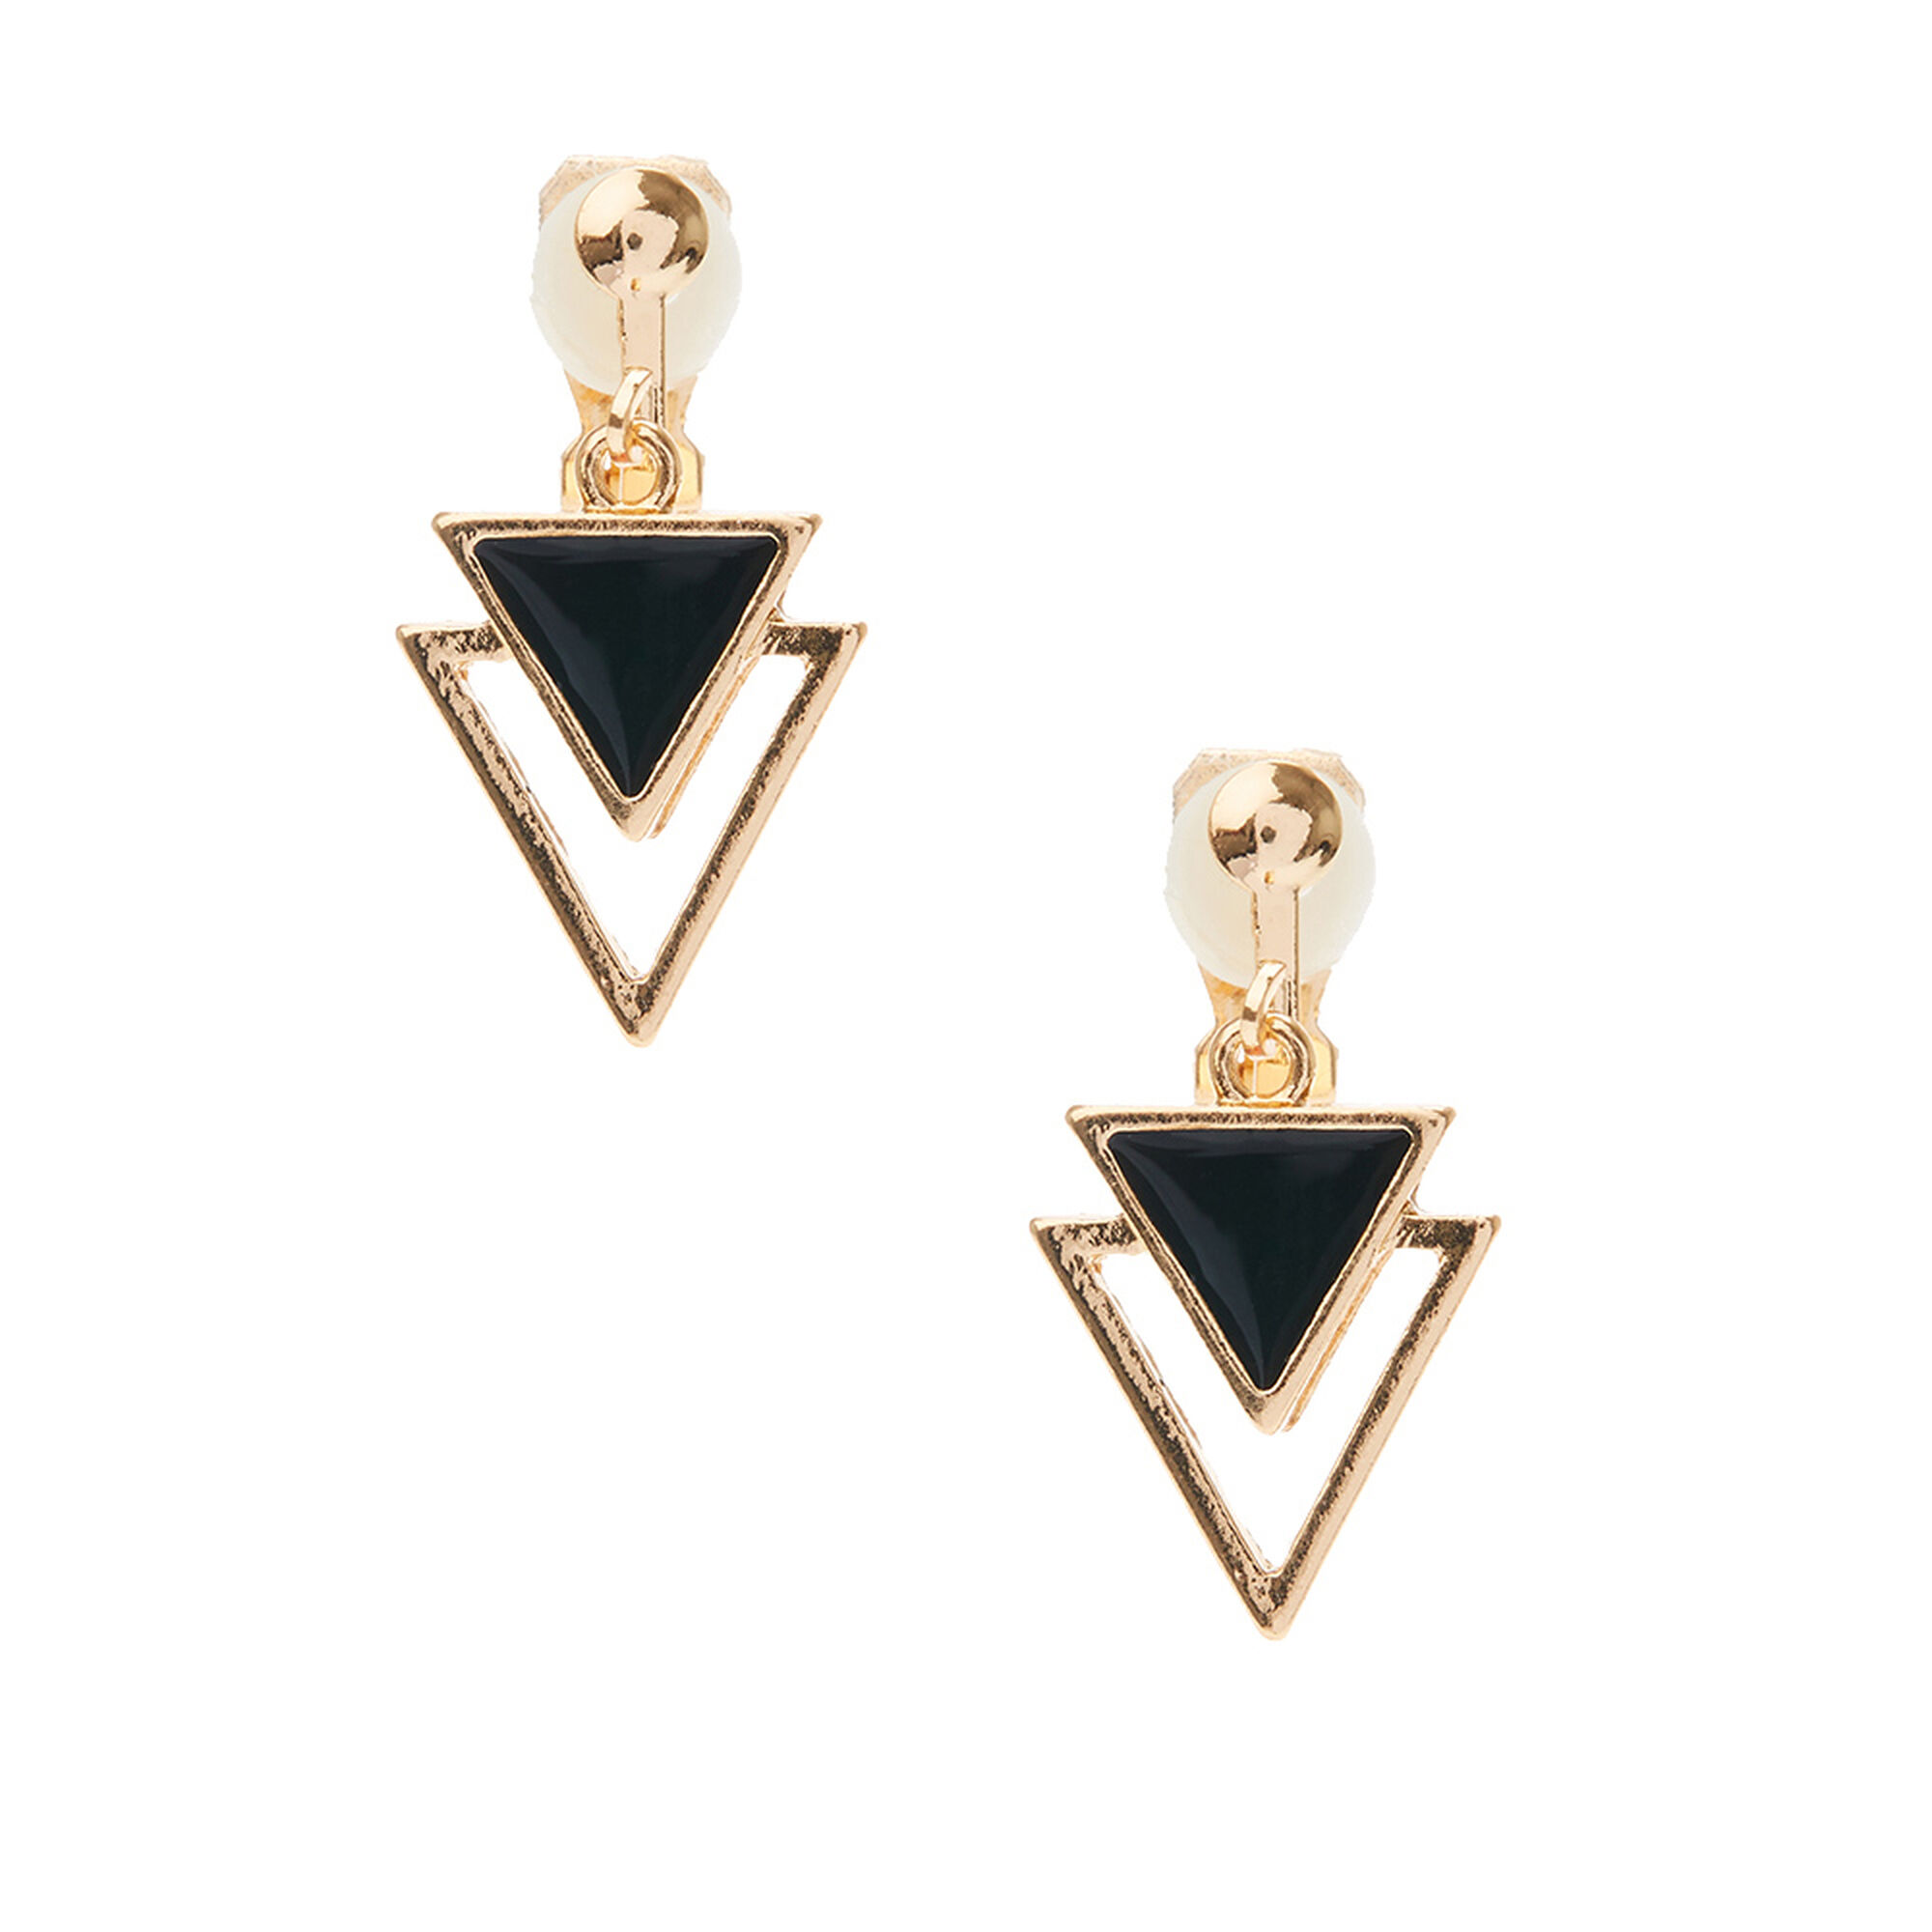 View Claires GoldTone Geometric Triangle Clip On Drop Earrings Black information